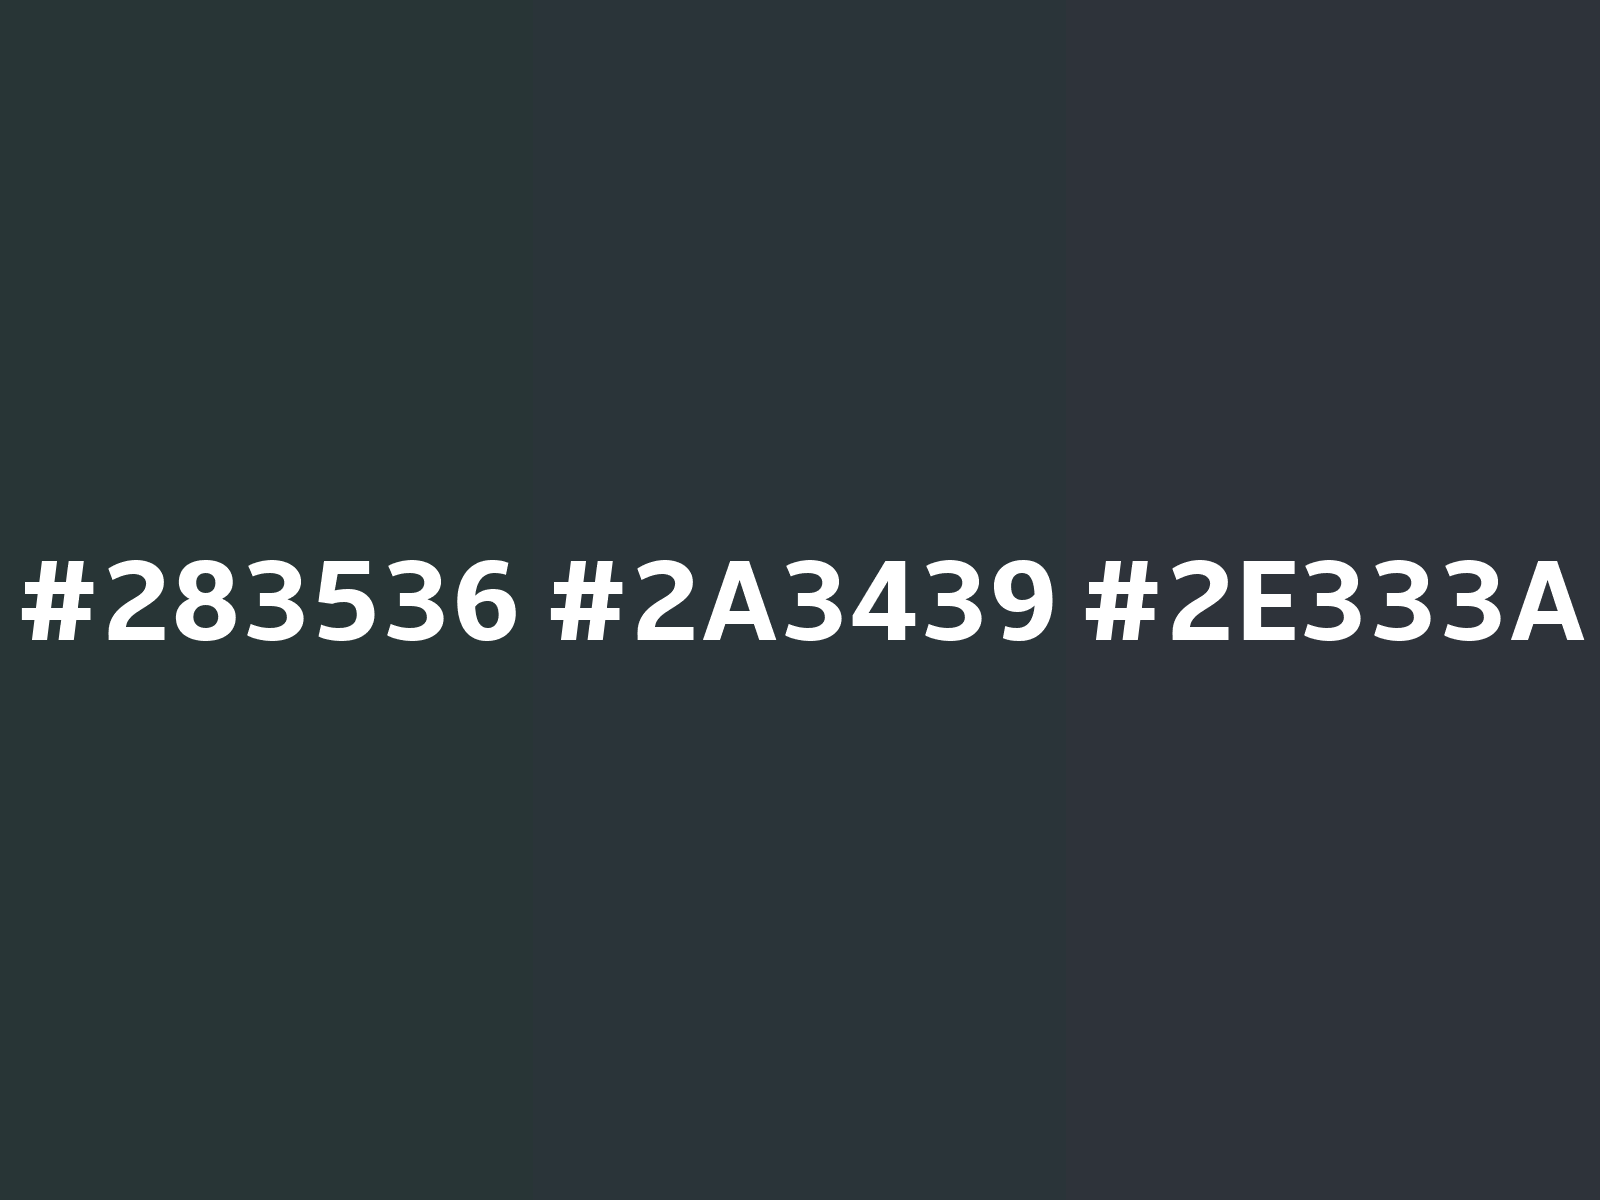 colorswall on X: Shades of Gunmetal color #2C3539 hex #2c3539